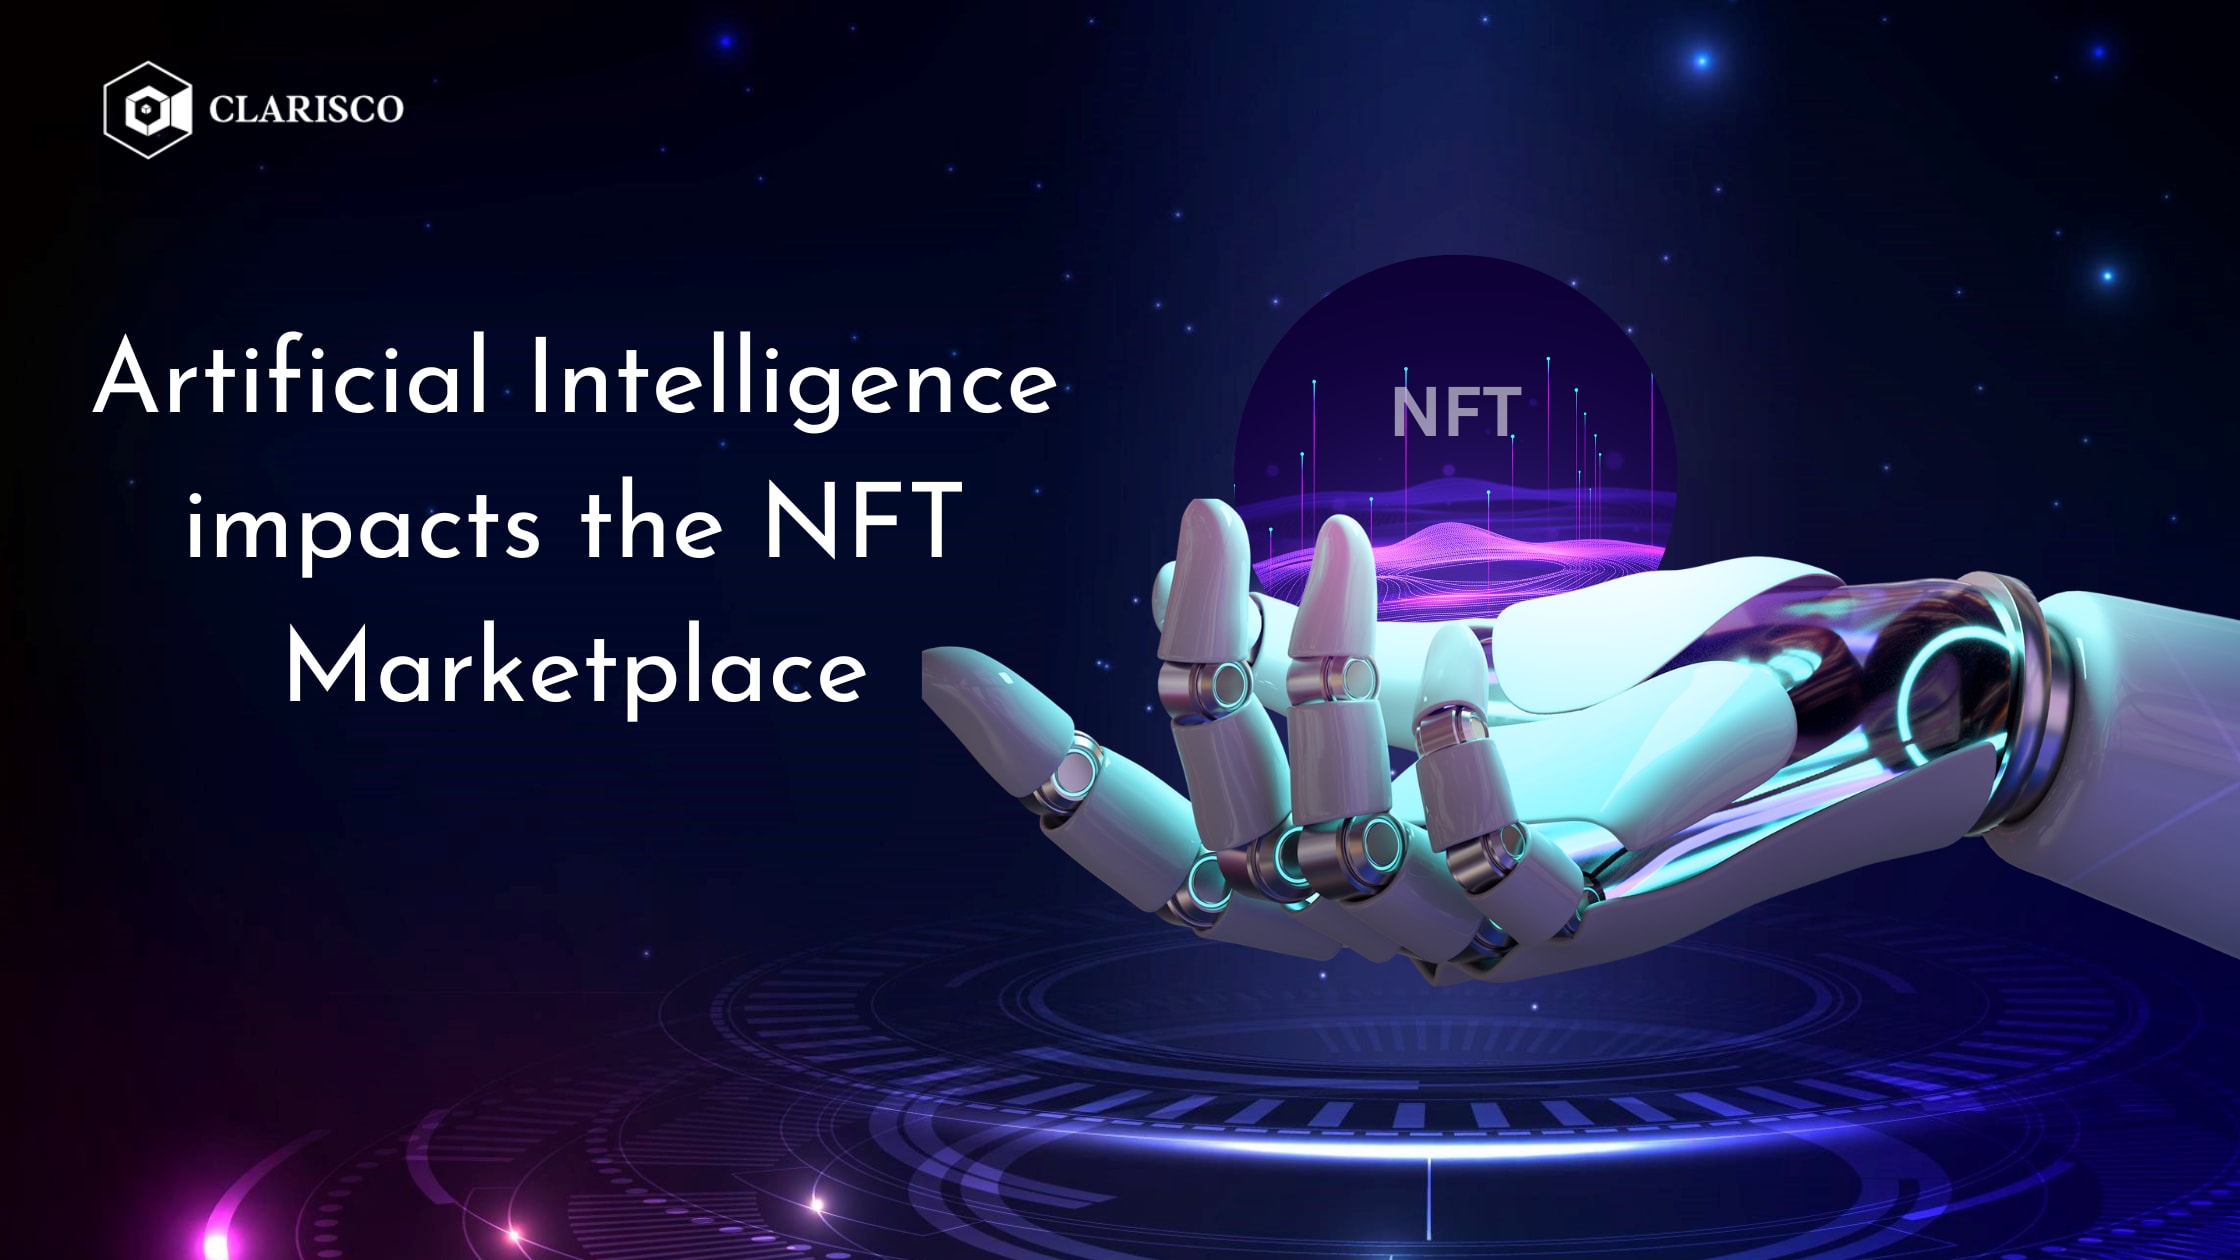 How Artificial Intelligence impacts the NFT Marketplace? | The Chain